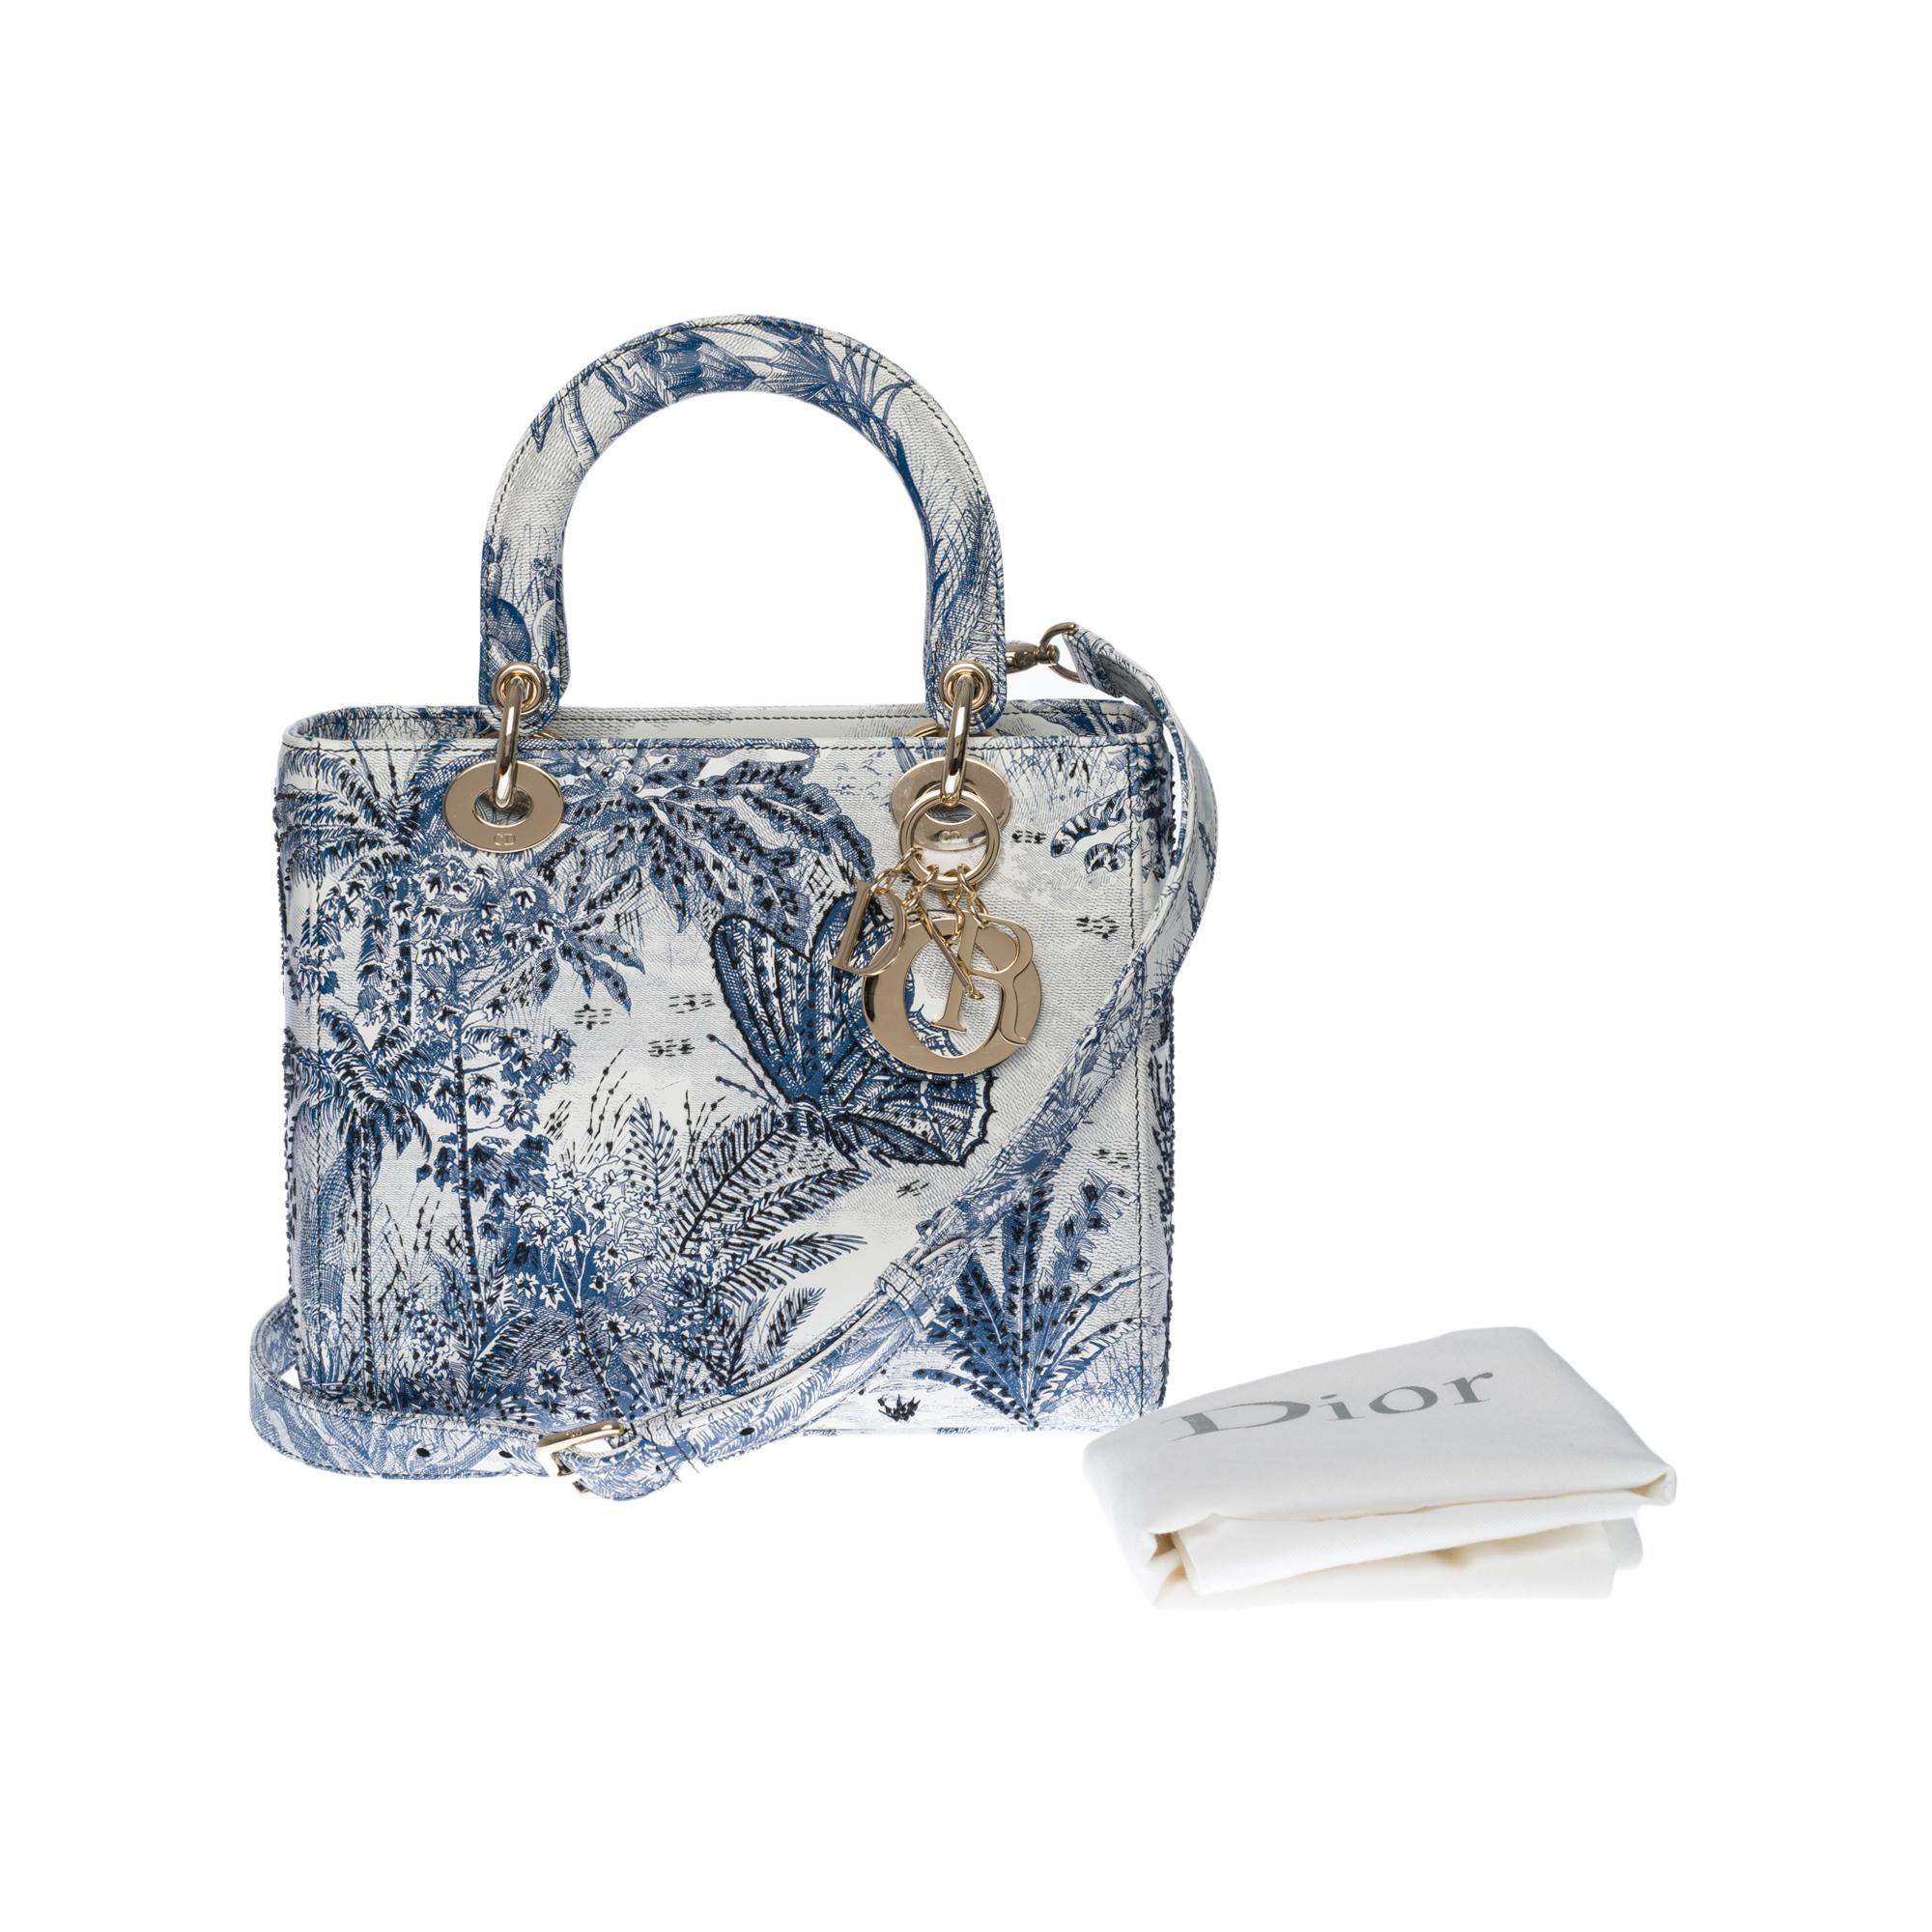 New - Limited Edition Lady Dior MM in blue and white Jouy's Canvas , SHW 4